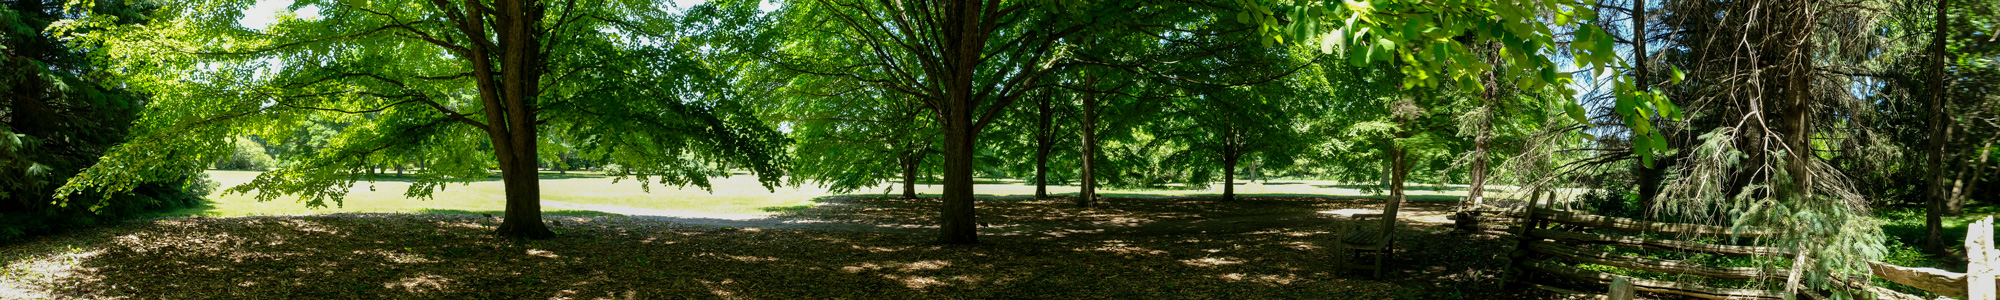 colour photo of a forested area of katsura trees